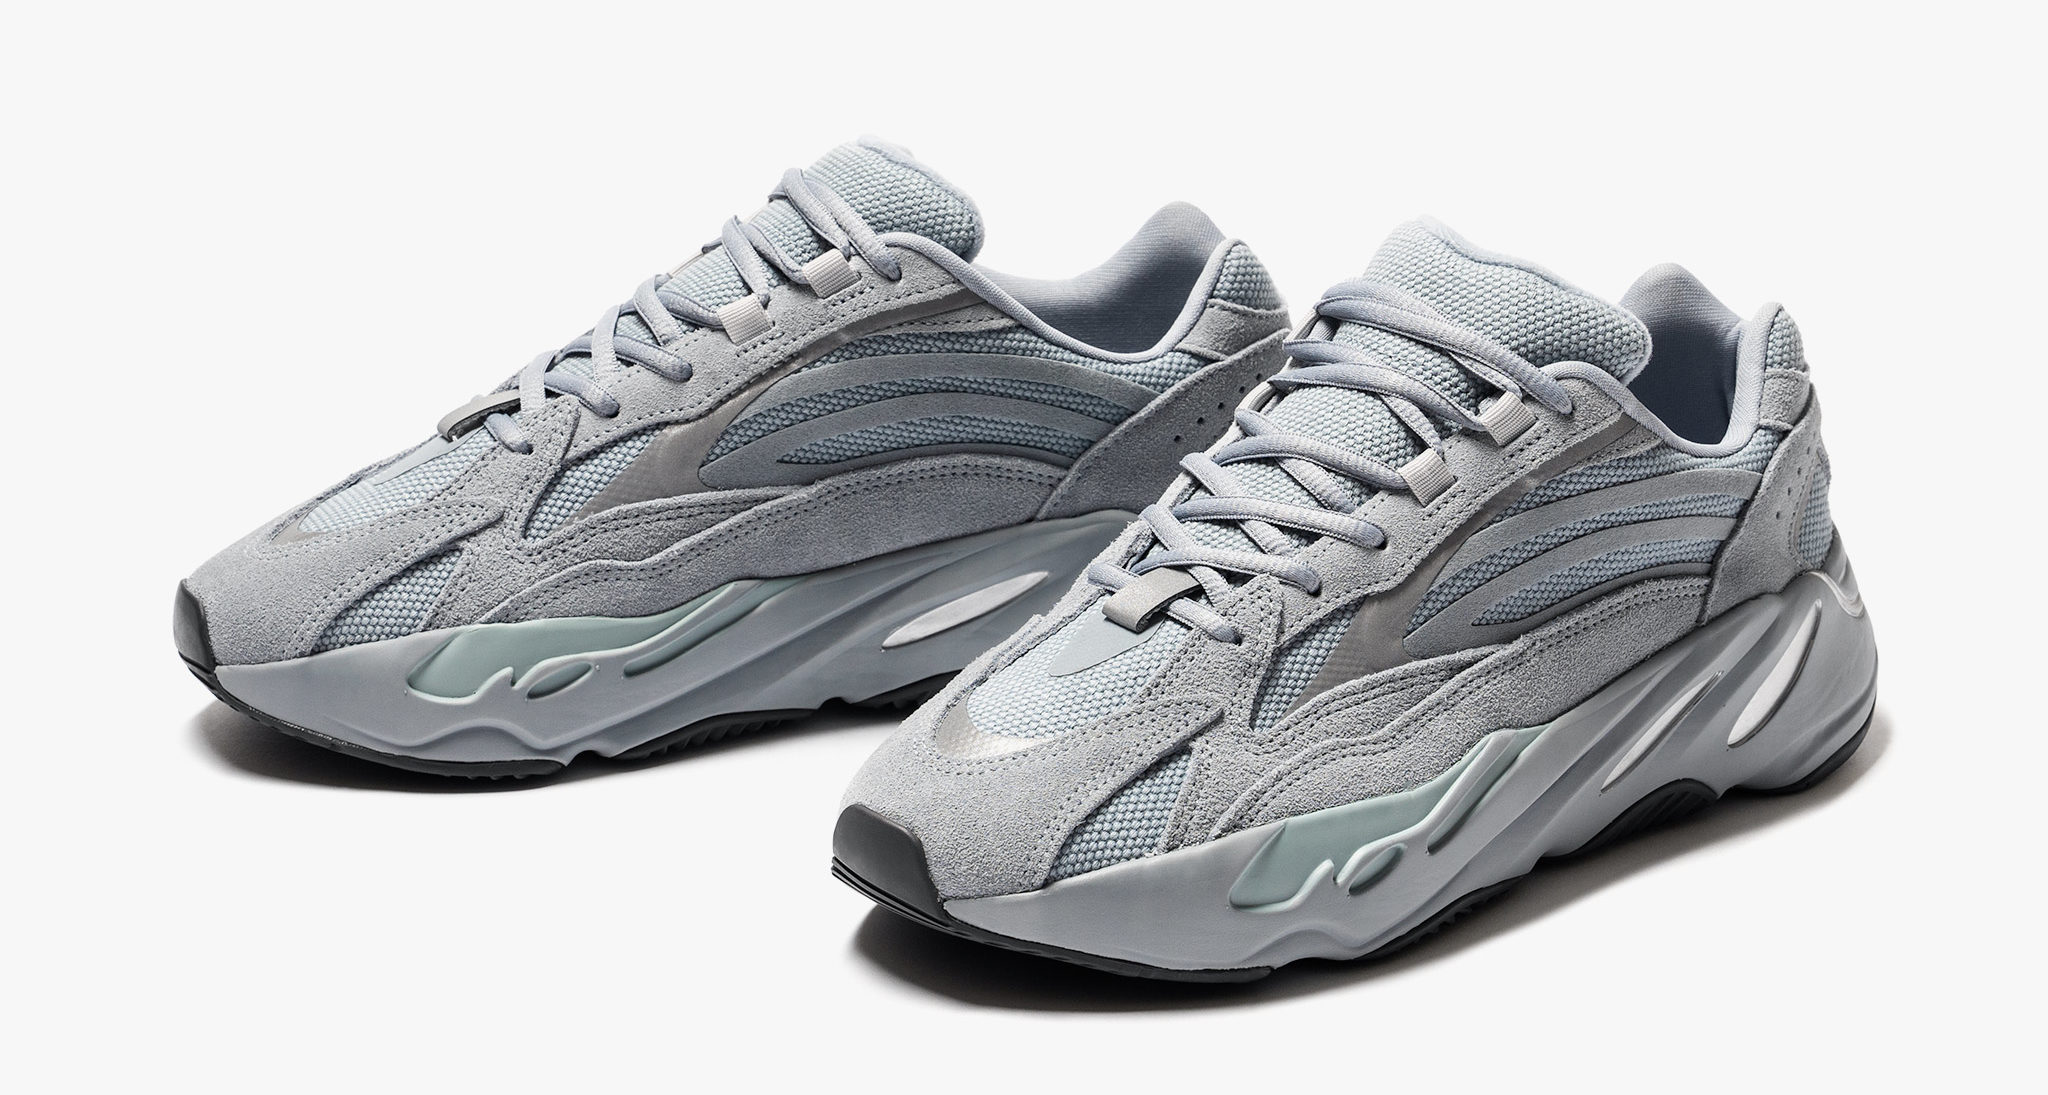 First Look at the rumoured Yeezy 700 v2 Hospital Blue